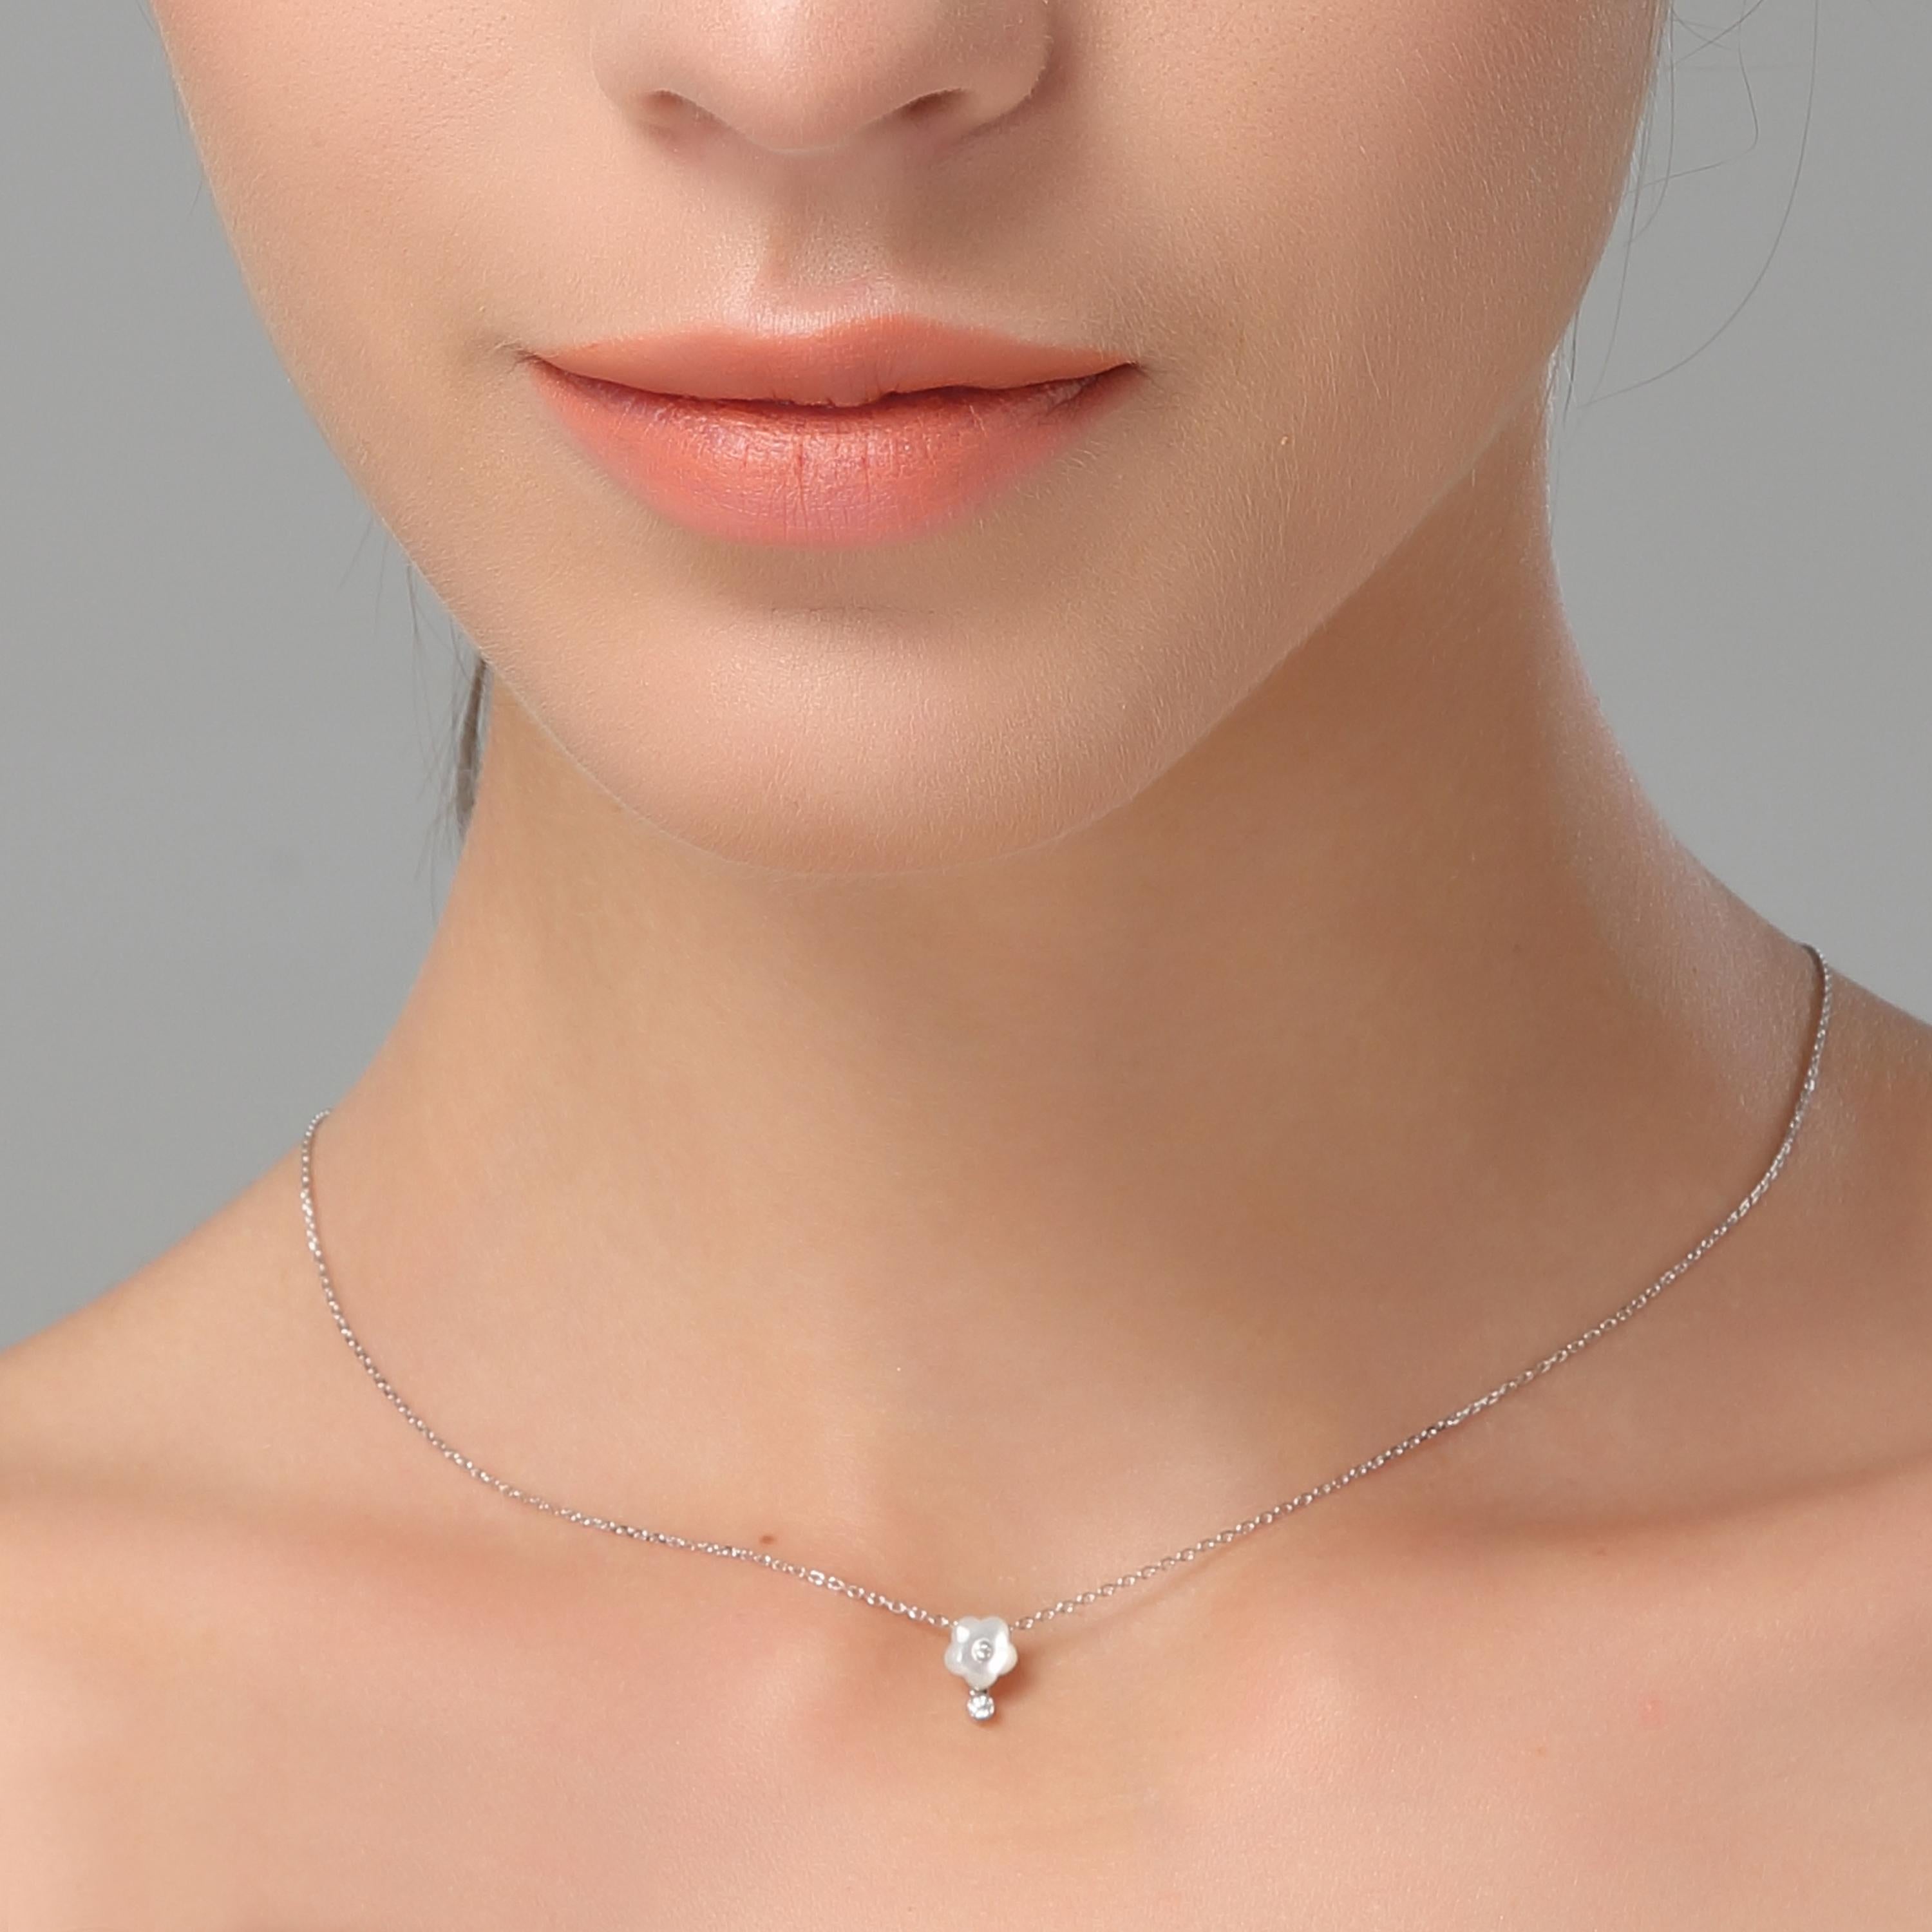 Bloom with the sweet essence of the delicate alyssum flowers. Alyssum small pendant with flower shaped mother of pearls and a 0.023ct diamond, set in 18ct white gold with a high polish.

- Size (LxW):  8mm x 6mm
- Weight: 1gm
- Chain length: 16